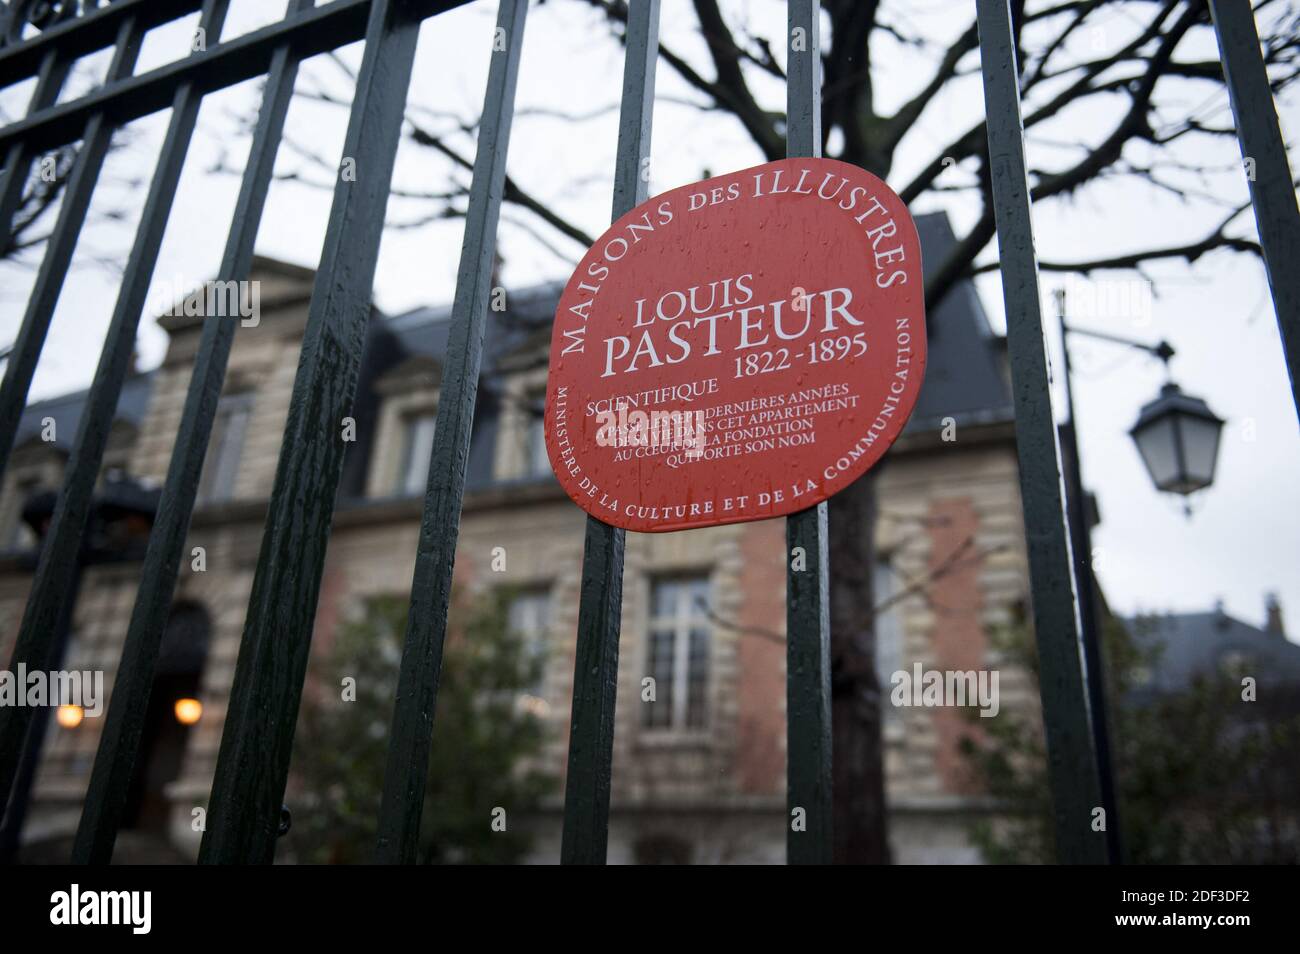 Illustration of Pasteur Institute in Paris, France on March 2 , 2020 Photo by Magali Cohen/ABACAPRESS.COM Stock Photo